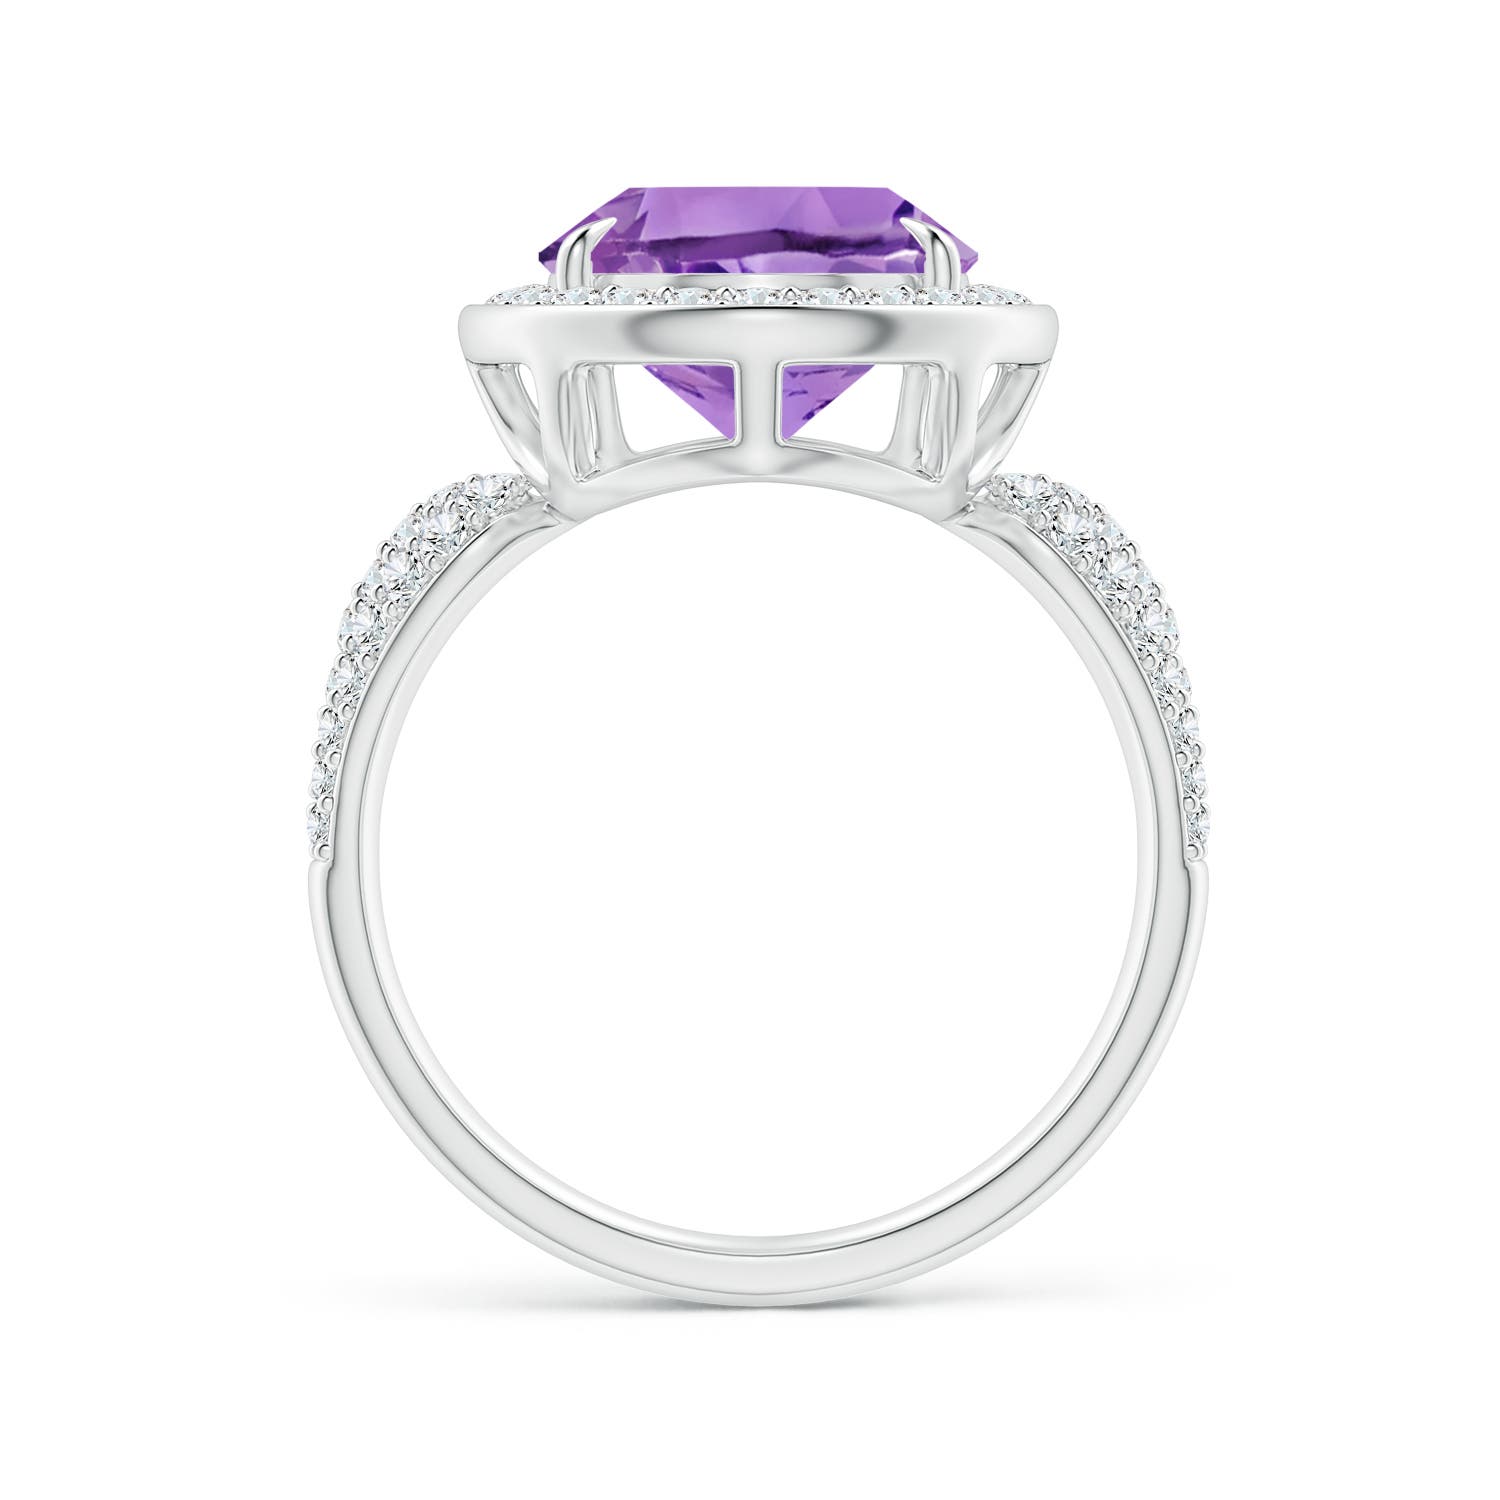 A - Amethyst / 5.48 CT / 14 KT White Gold